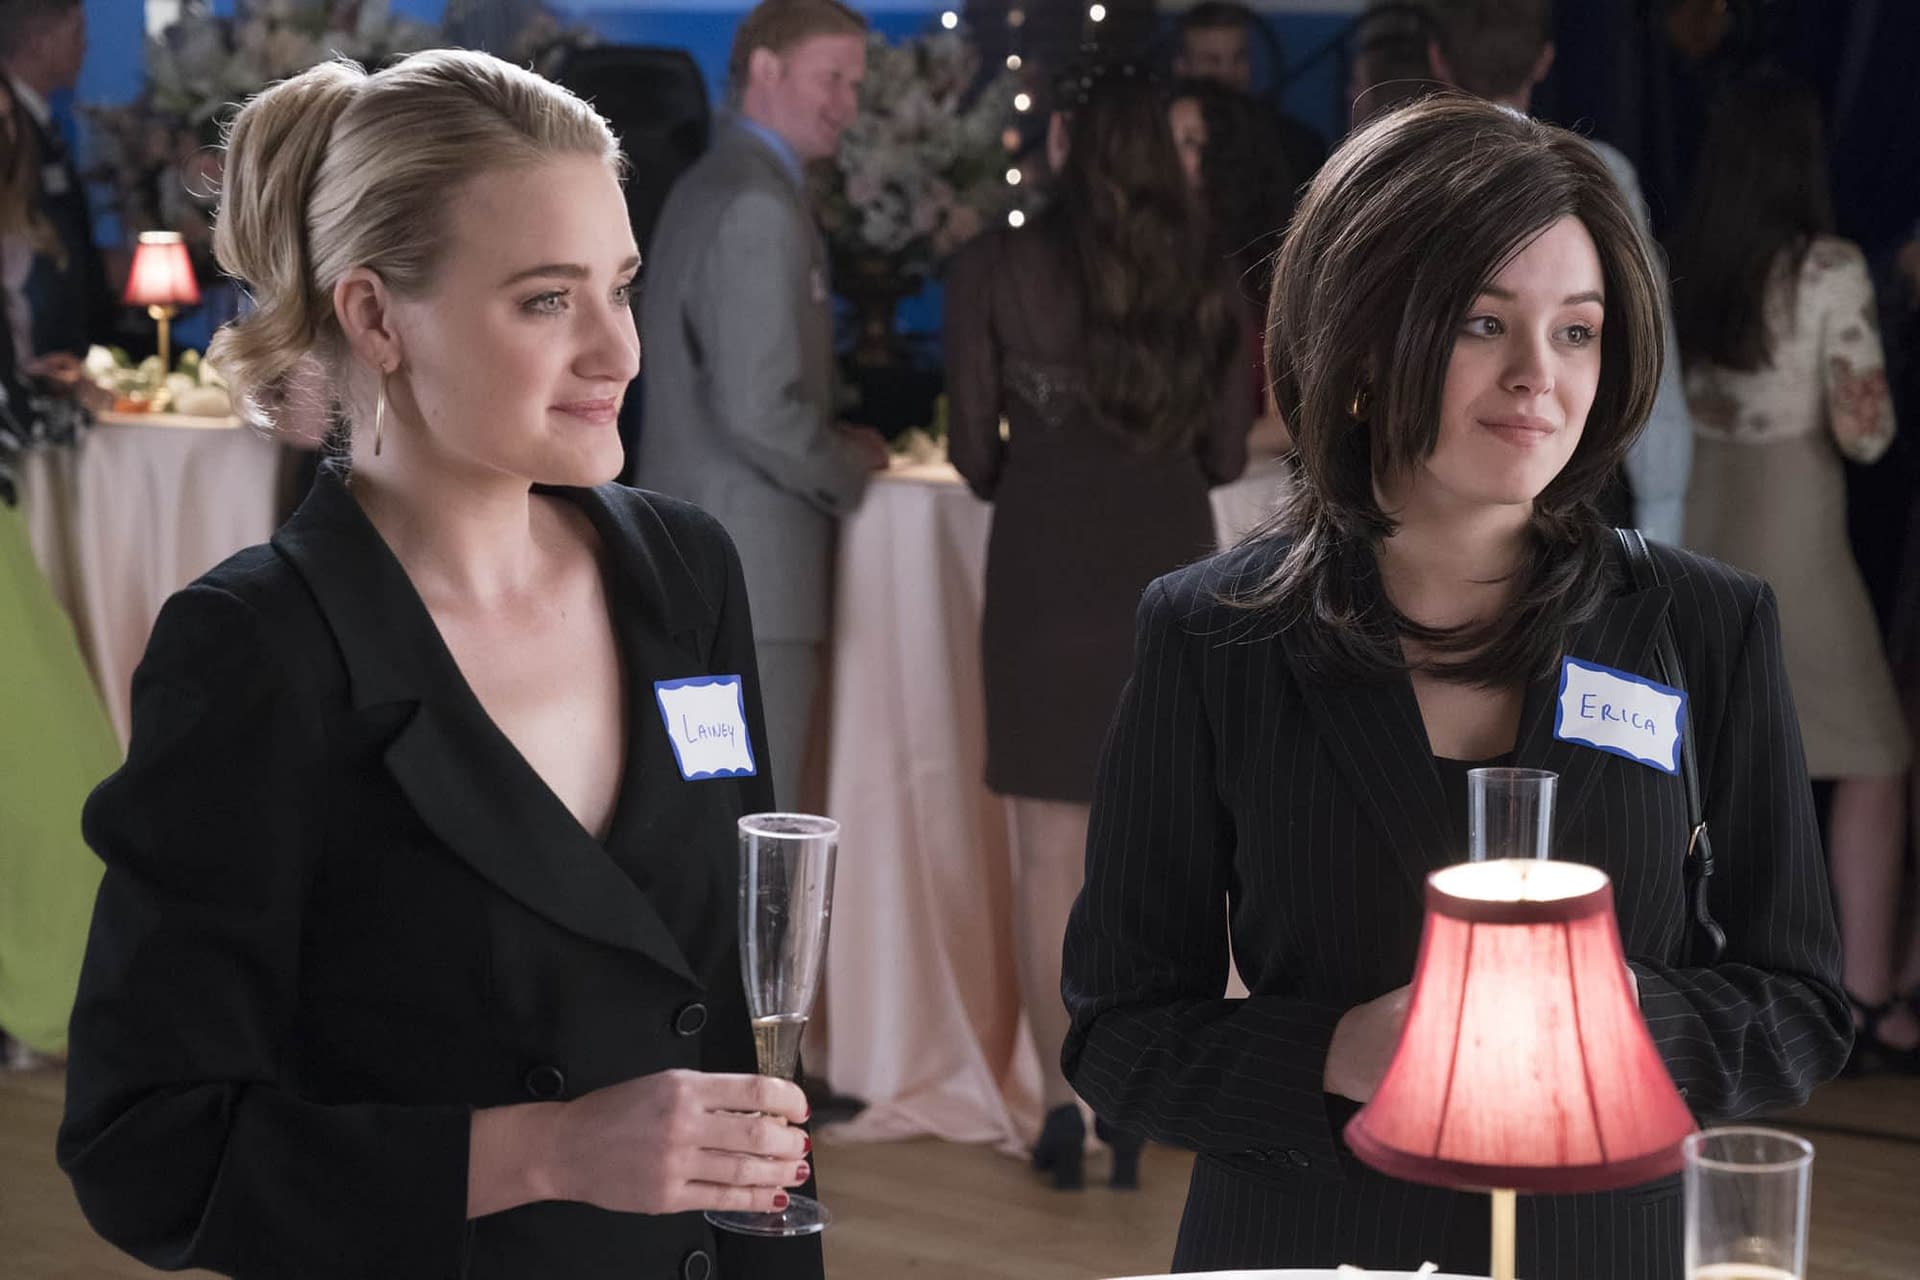 'Schooled' Season 1, Episode 8 "Lainey and Erica's High School Reunion" Does Right By Sitcoms [SPOILER REVIEW]